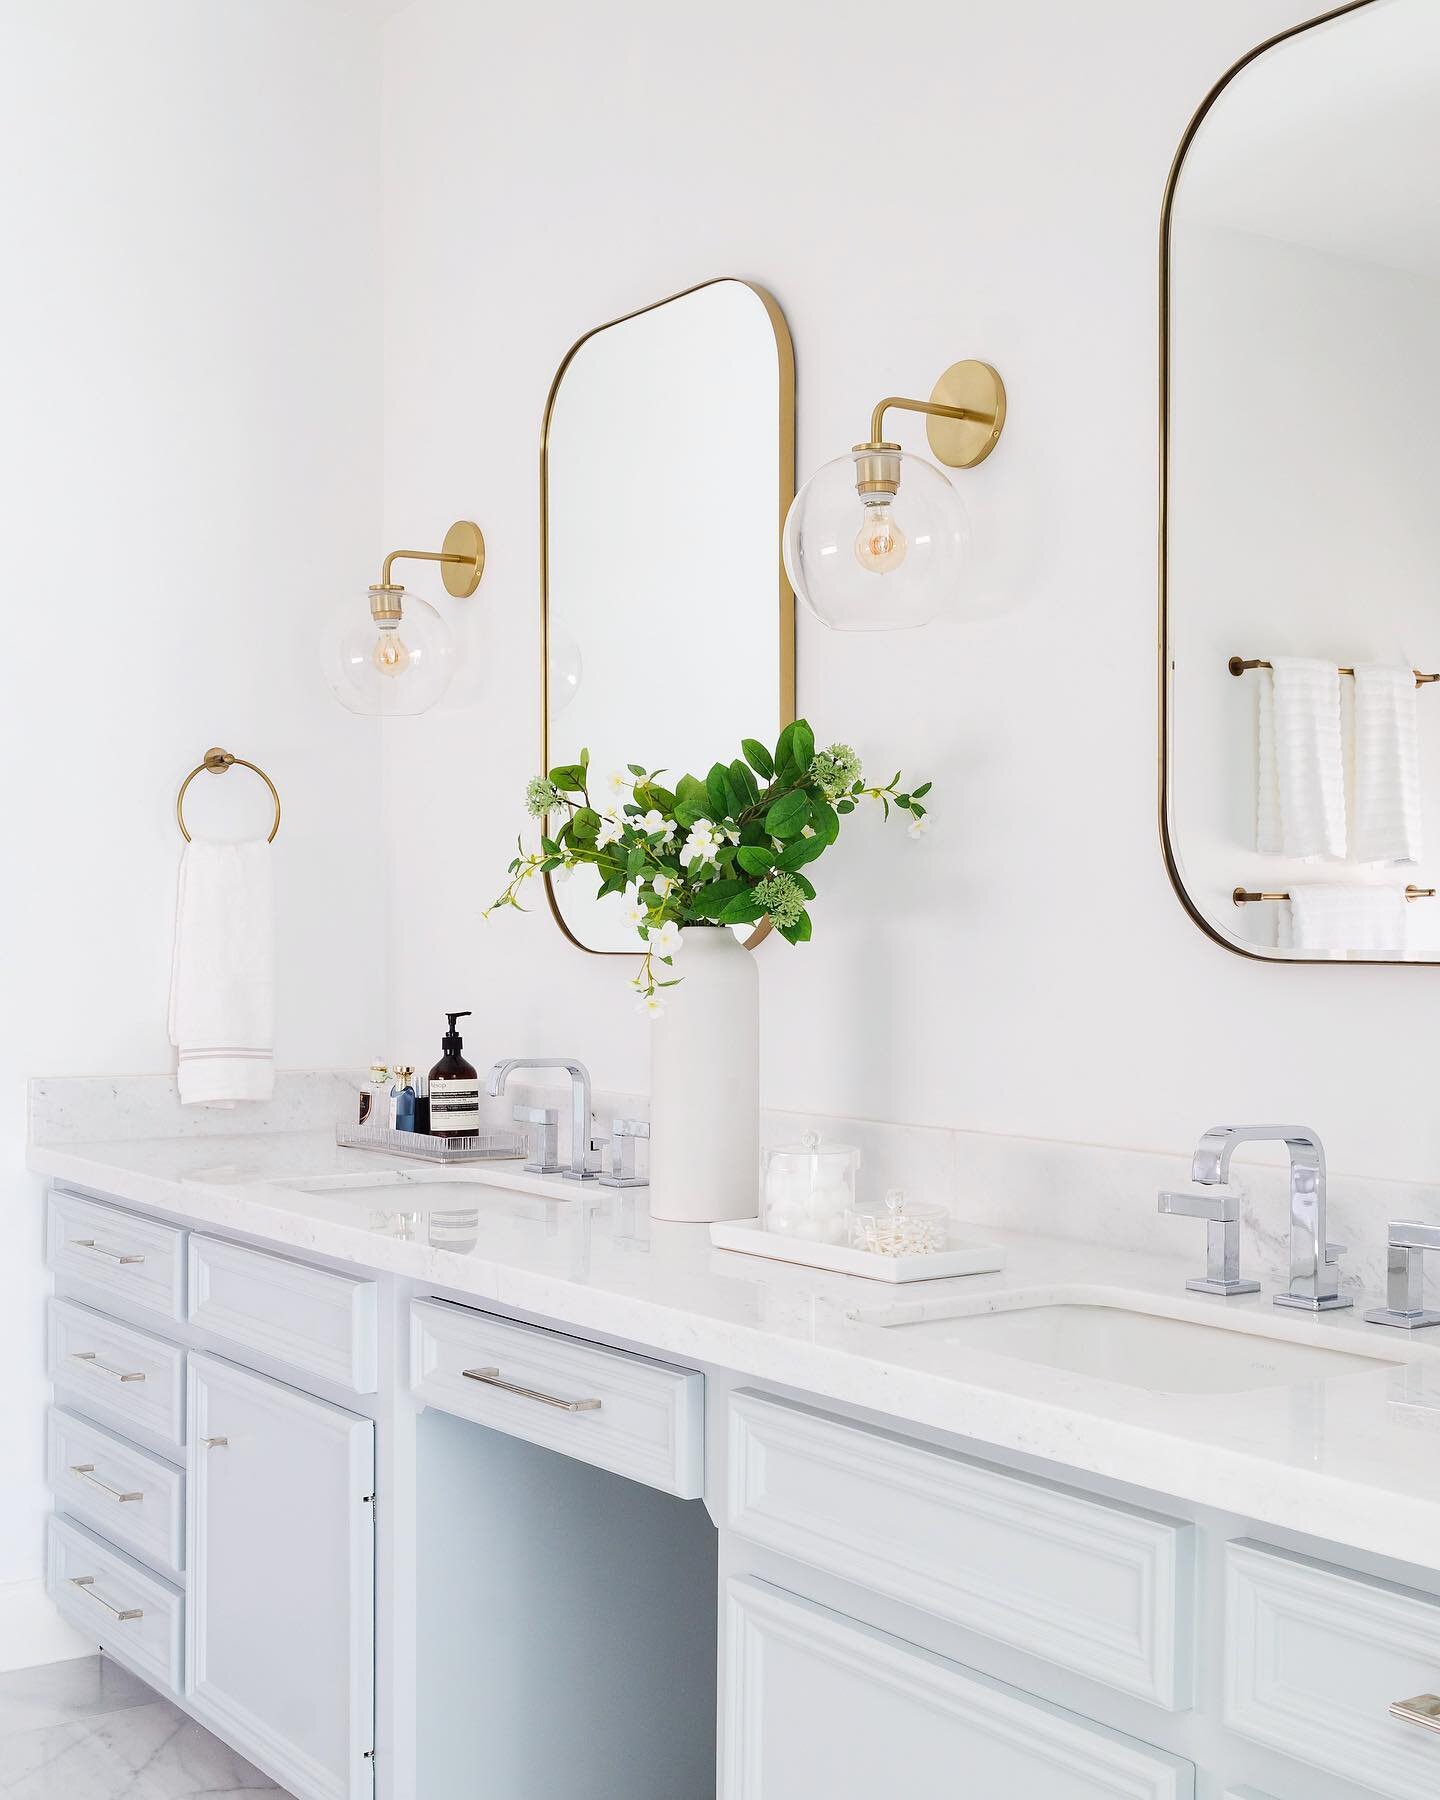 A clean &amp; serene bathroom is a necessity after a long day 🛁 Swipe for the before of this space before we gave it a little facelift 👉

#bathroomremodel #cosmetic #budgetremodel #facelift #newbathroom #primarybath #newbathroom #remodeling #design